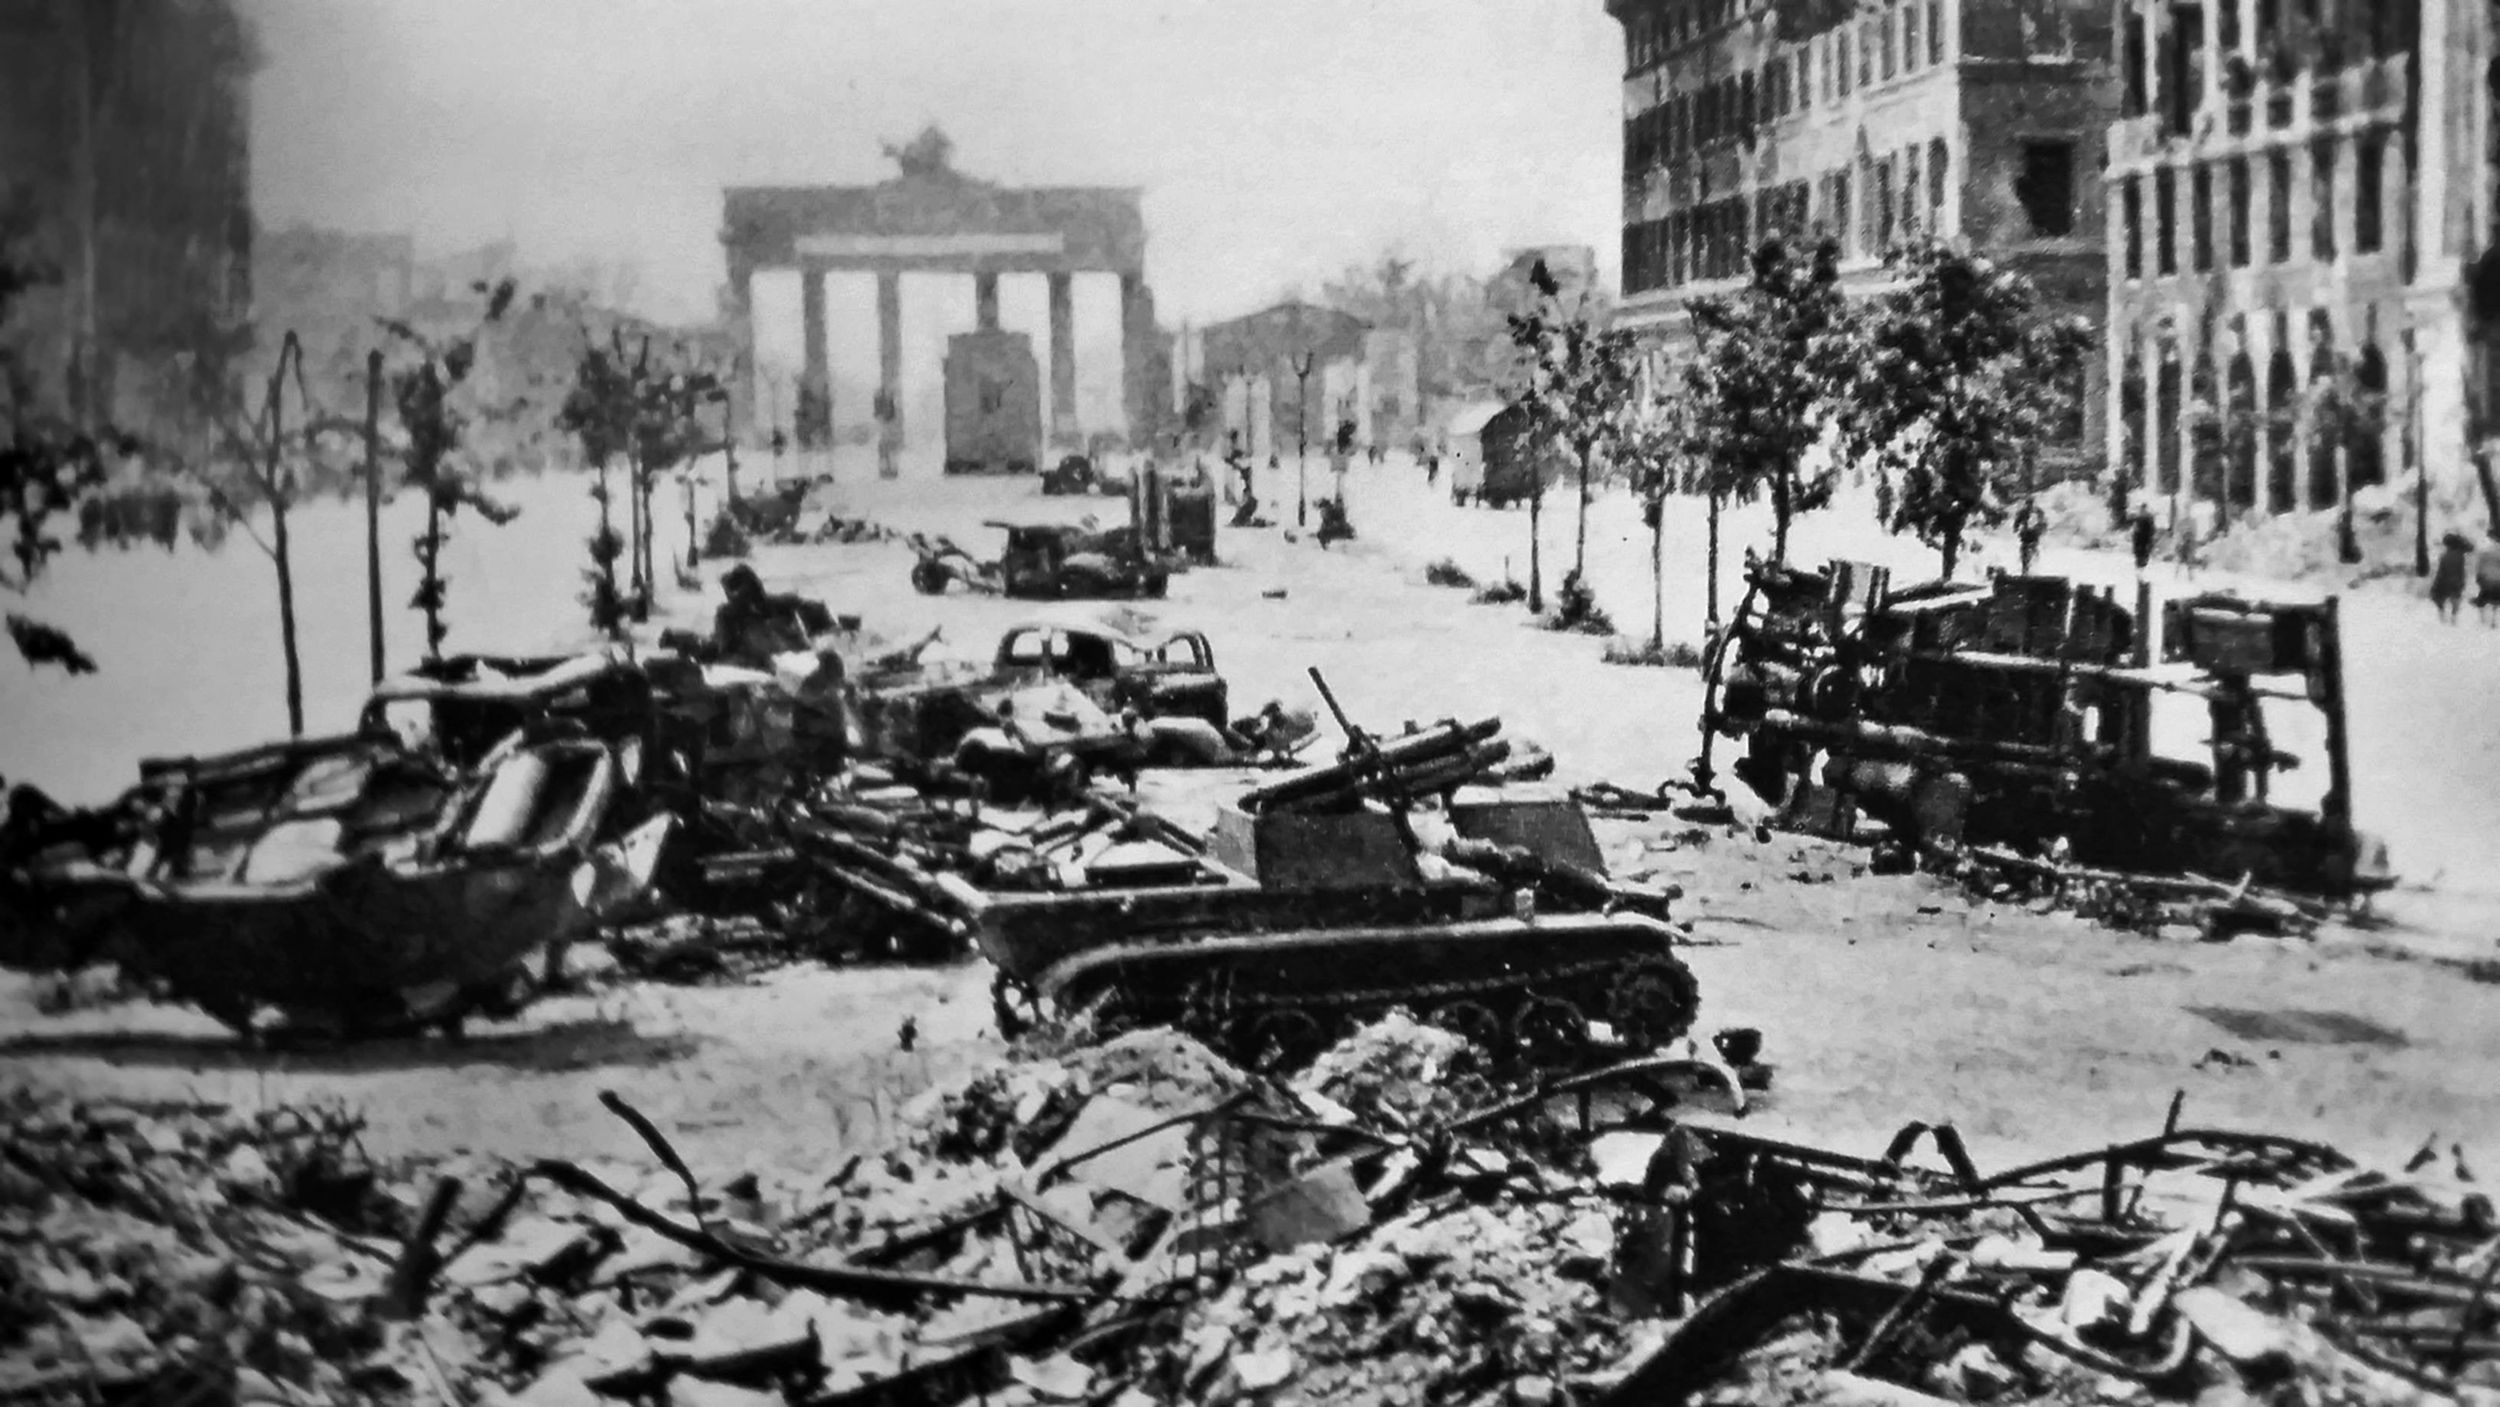 Demolished vehicles and damaged buildings are shown in this stark landscape of Berlin shortly after the battle in the spring of 1945. The Brandenburg Gate looms in the background.